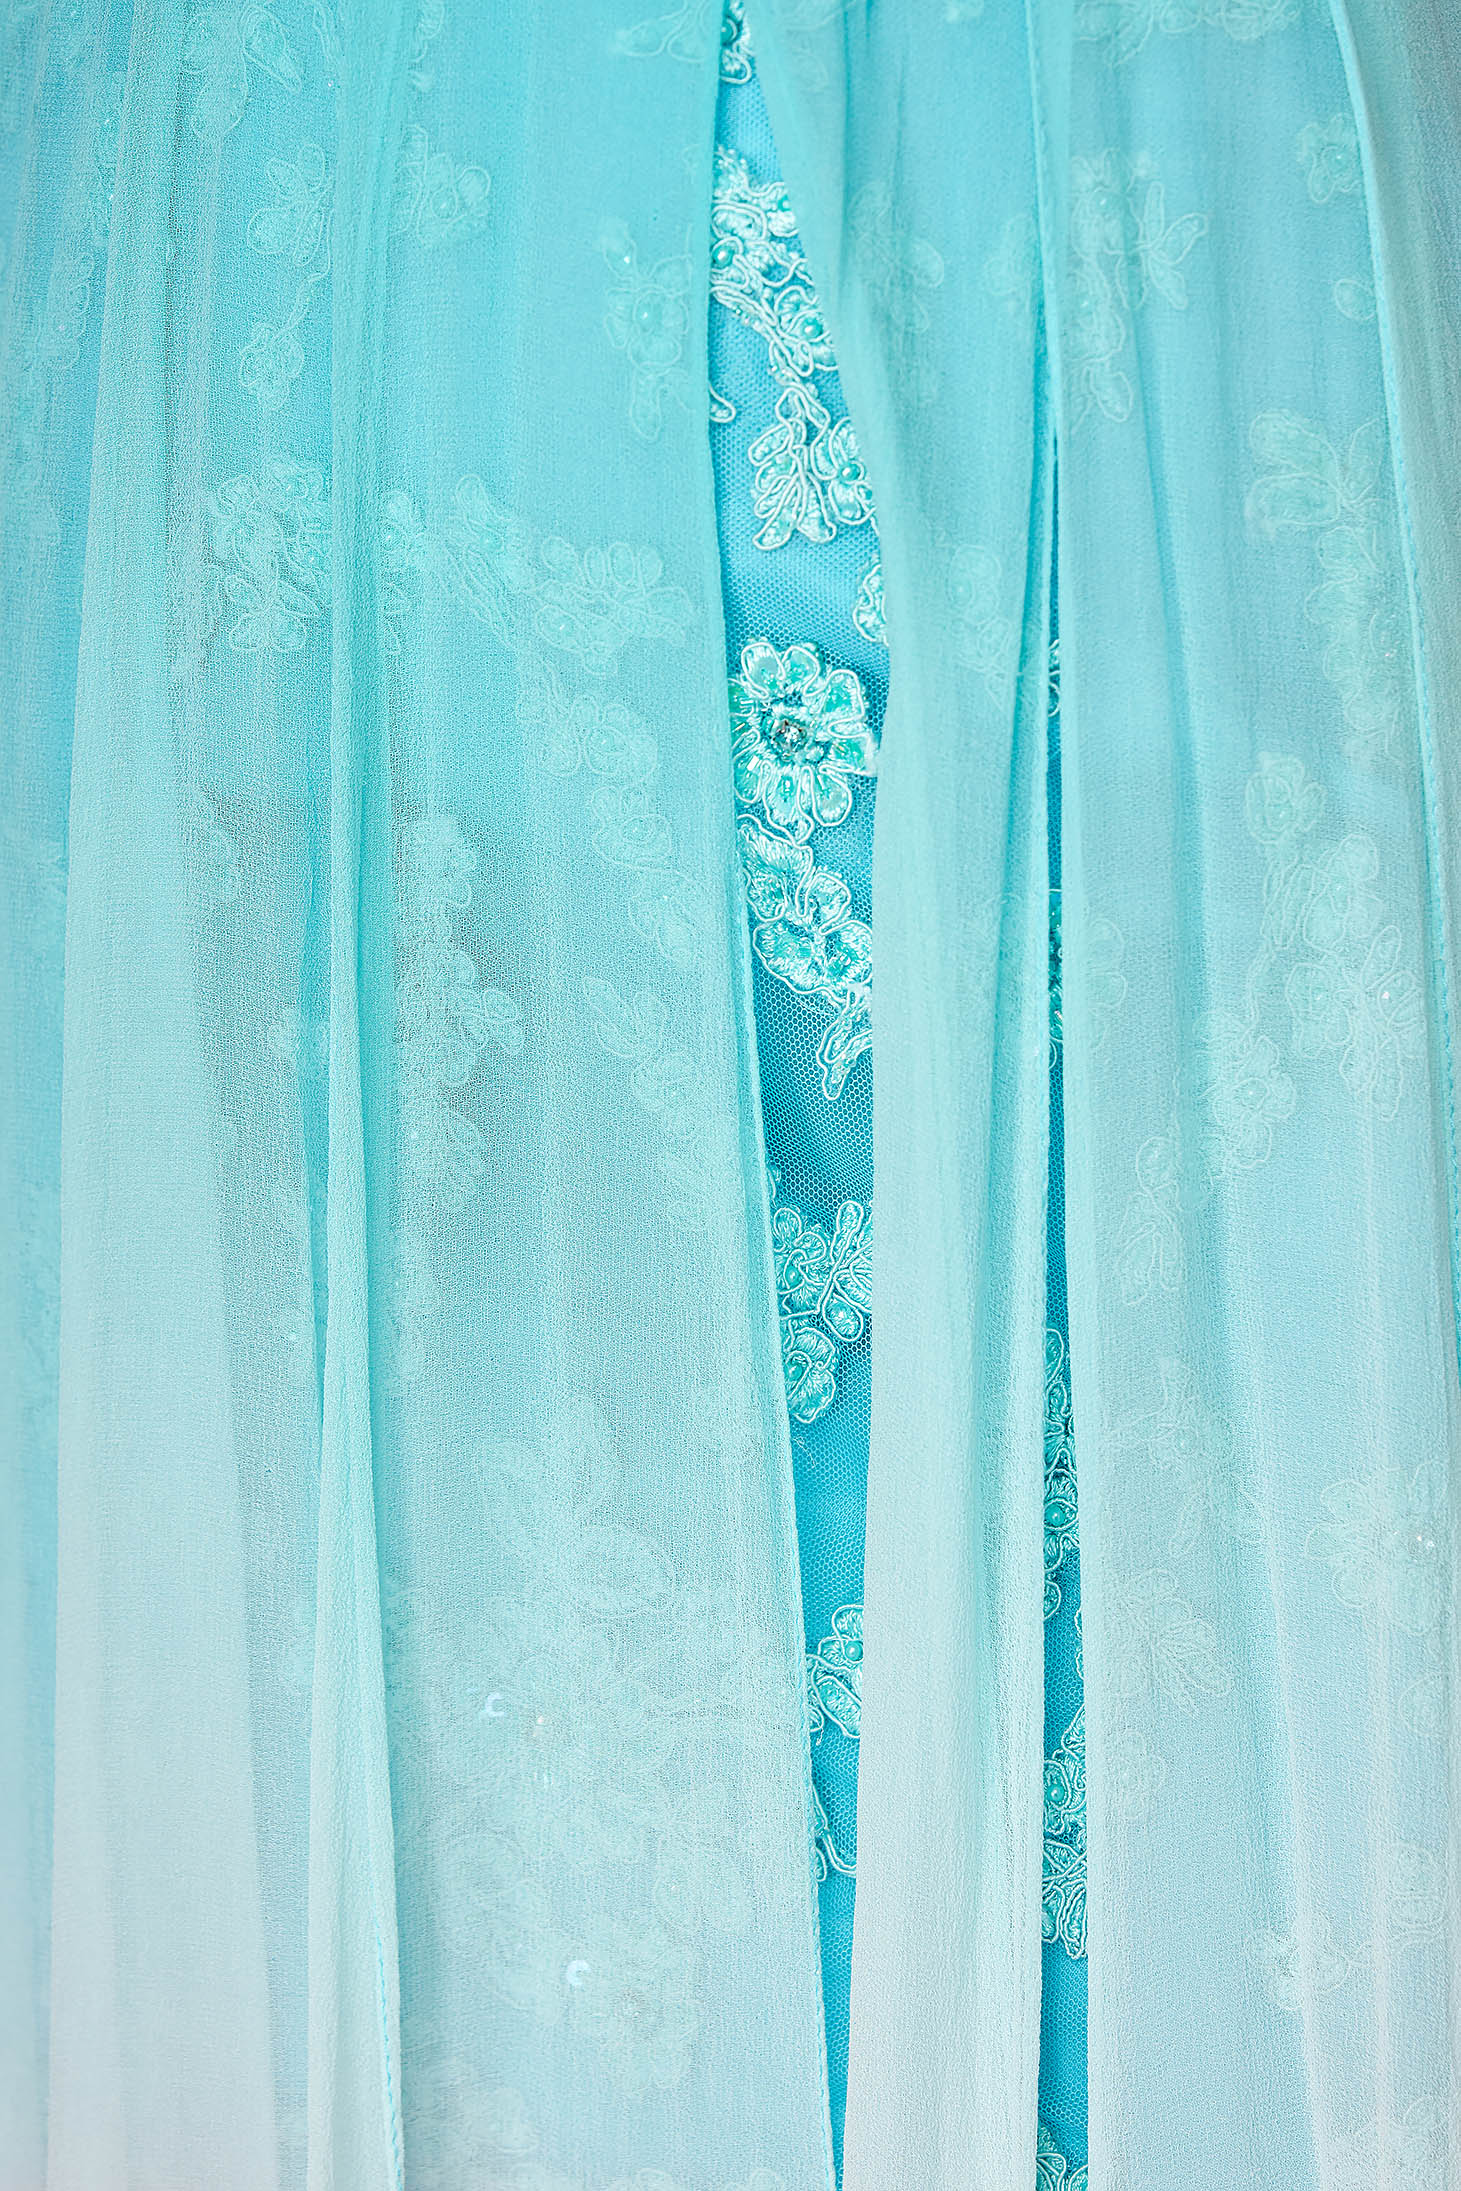 Sherri Hill aqua dress luxurious from veil fabric with sequin embellished details fabric overlay 5 - StarShinerS.com